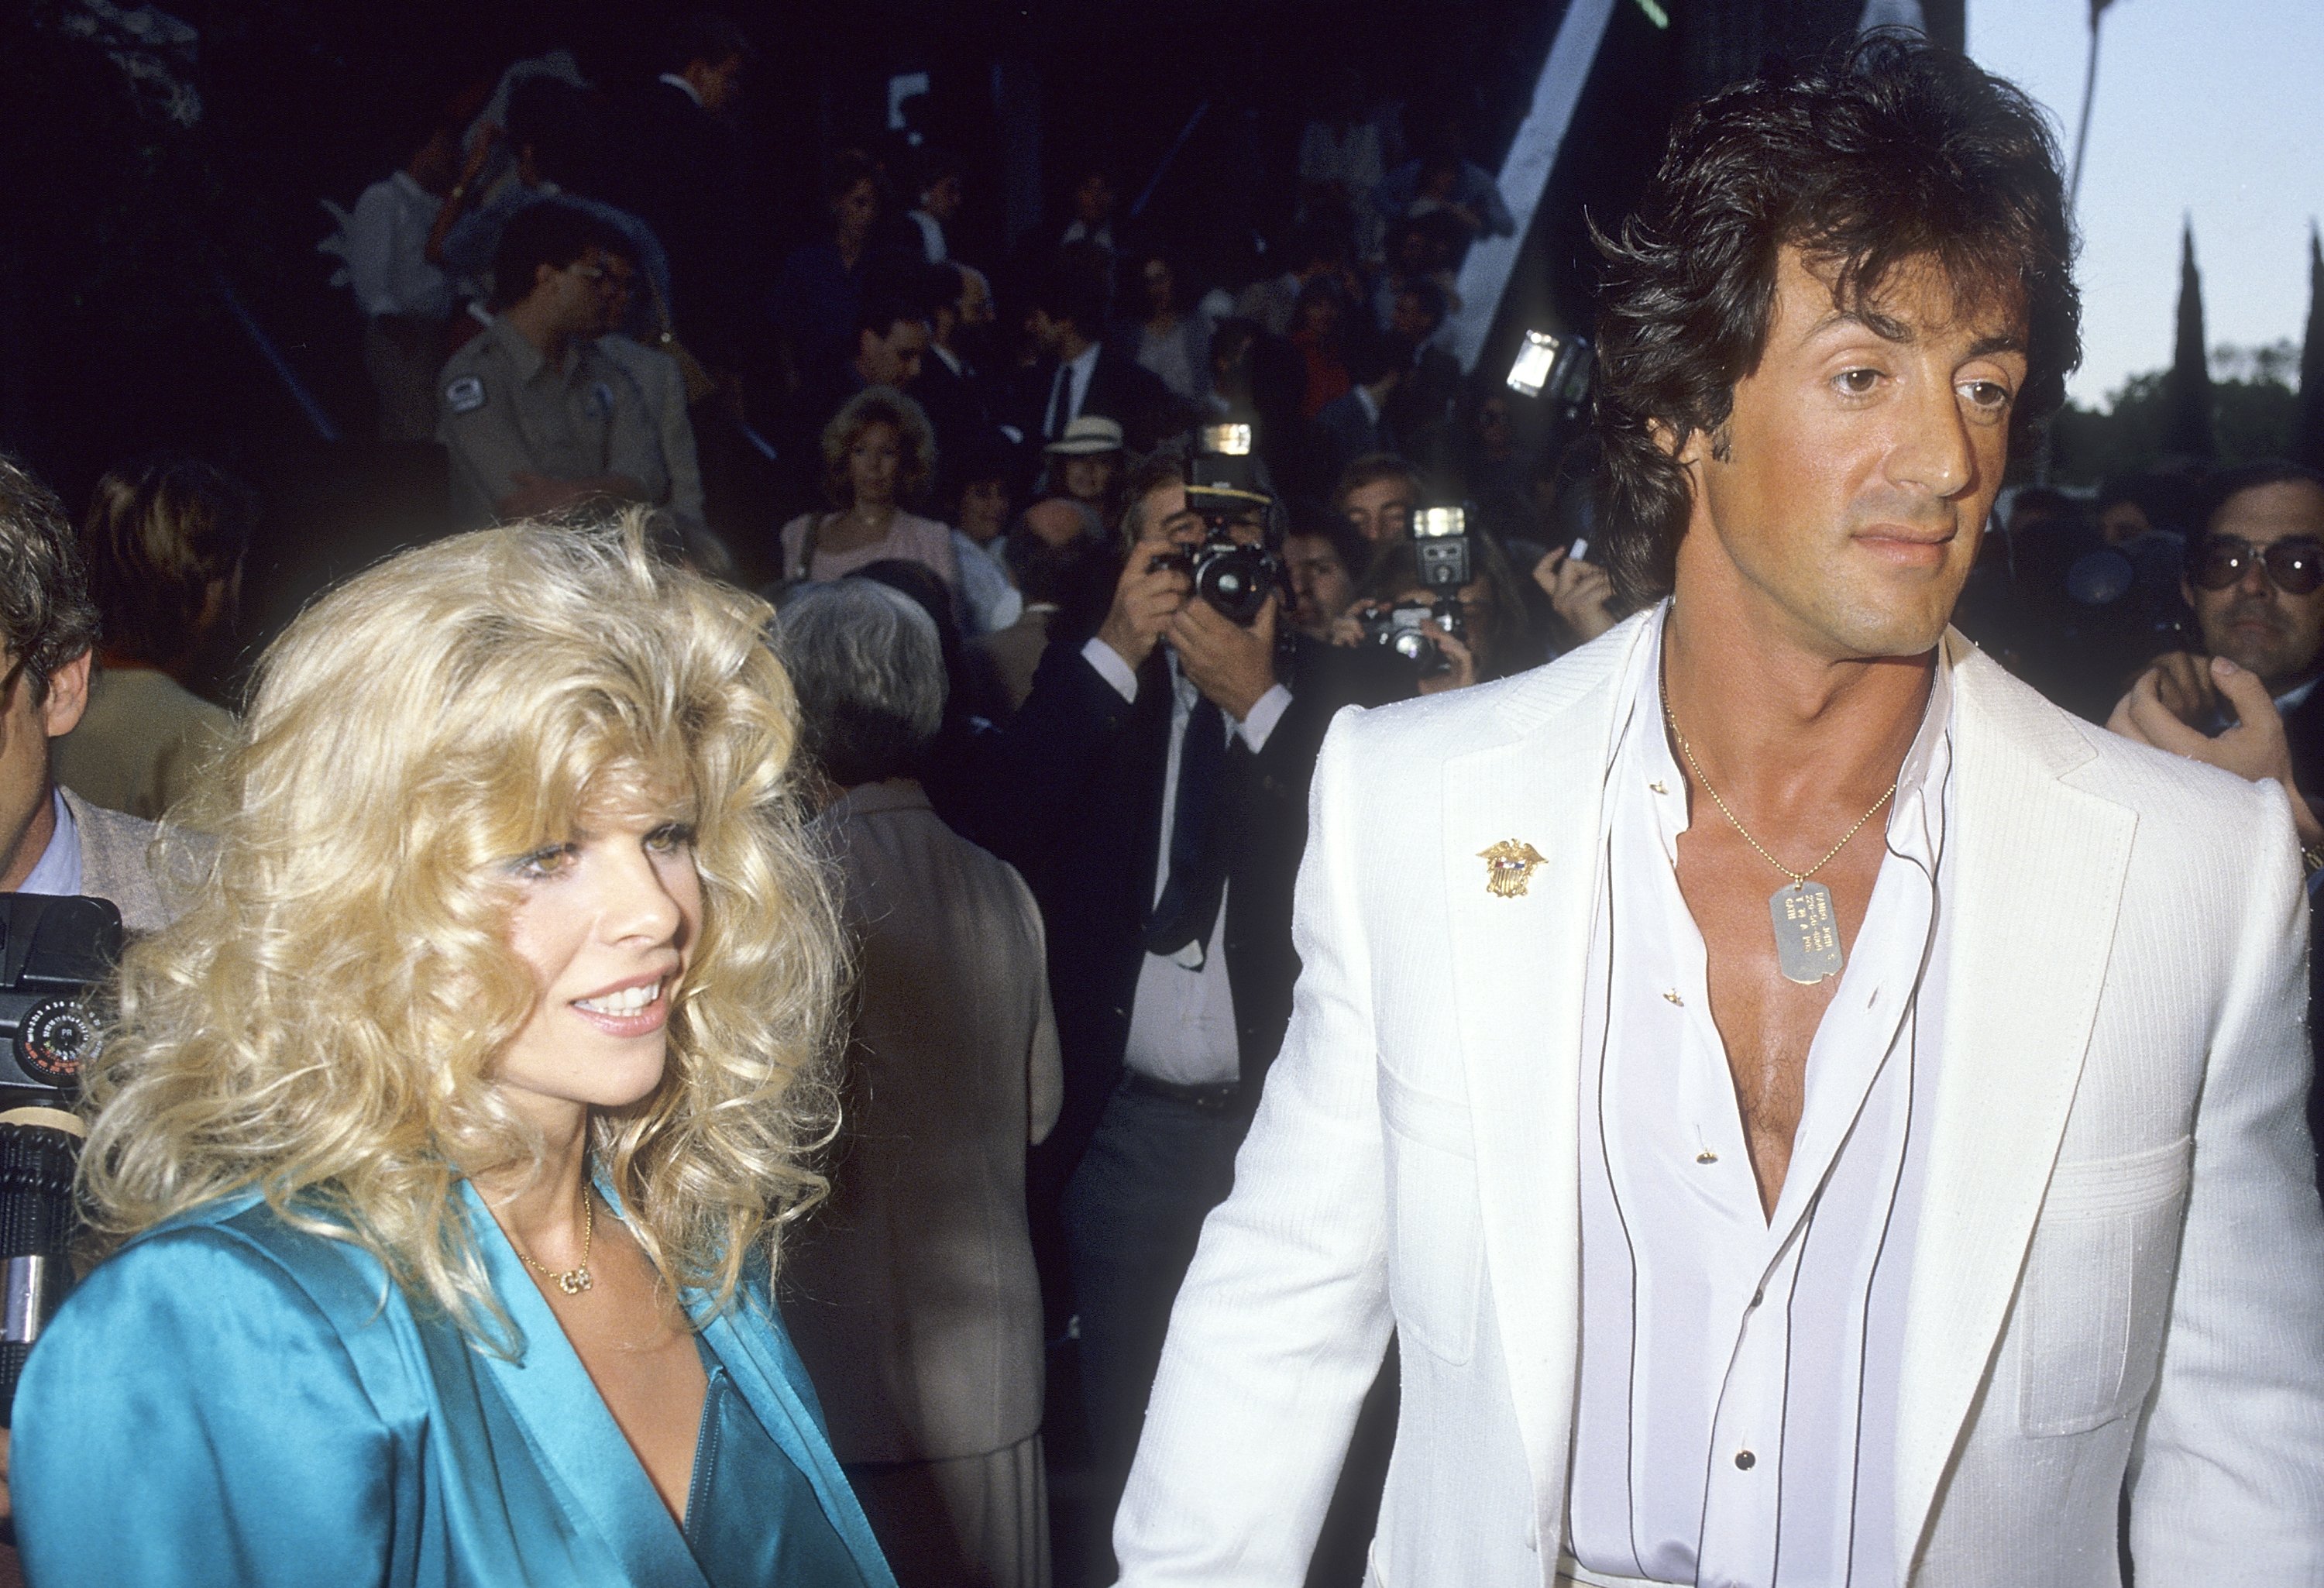 Sylvester Stallone and Sasha Czack at the Westwood premiere of "Ghostbusters" on June 7, 1984 | Source: Getty Images